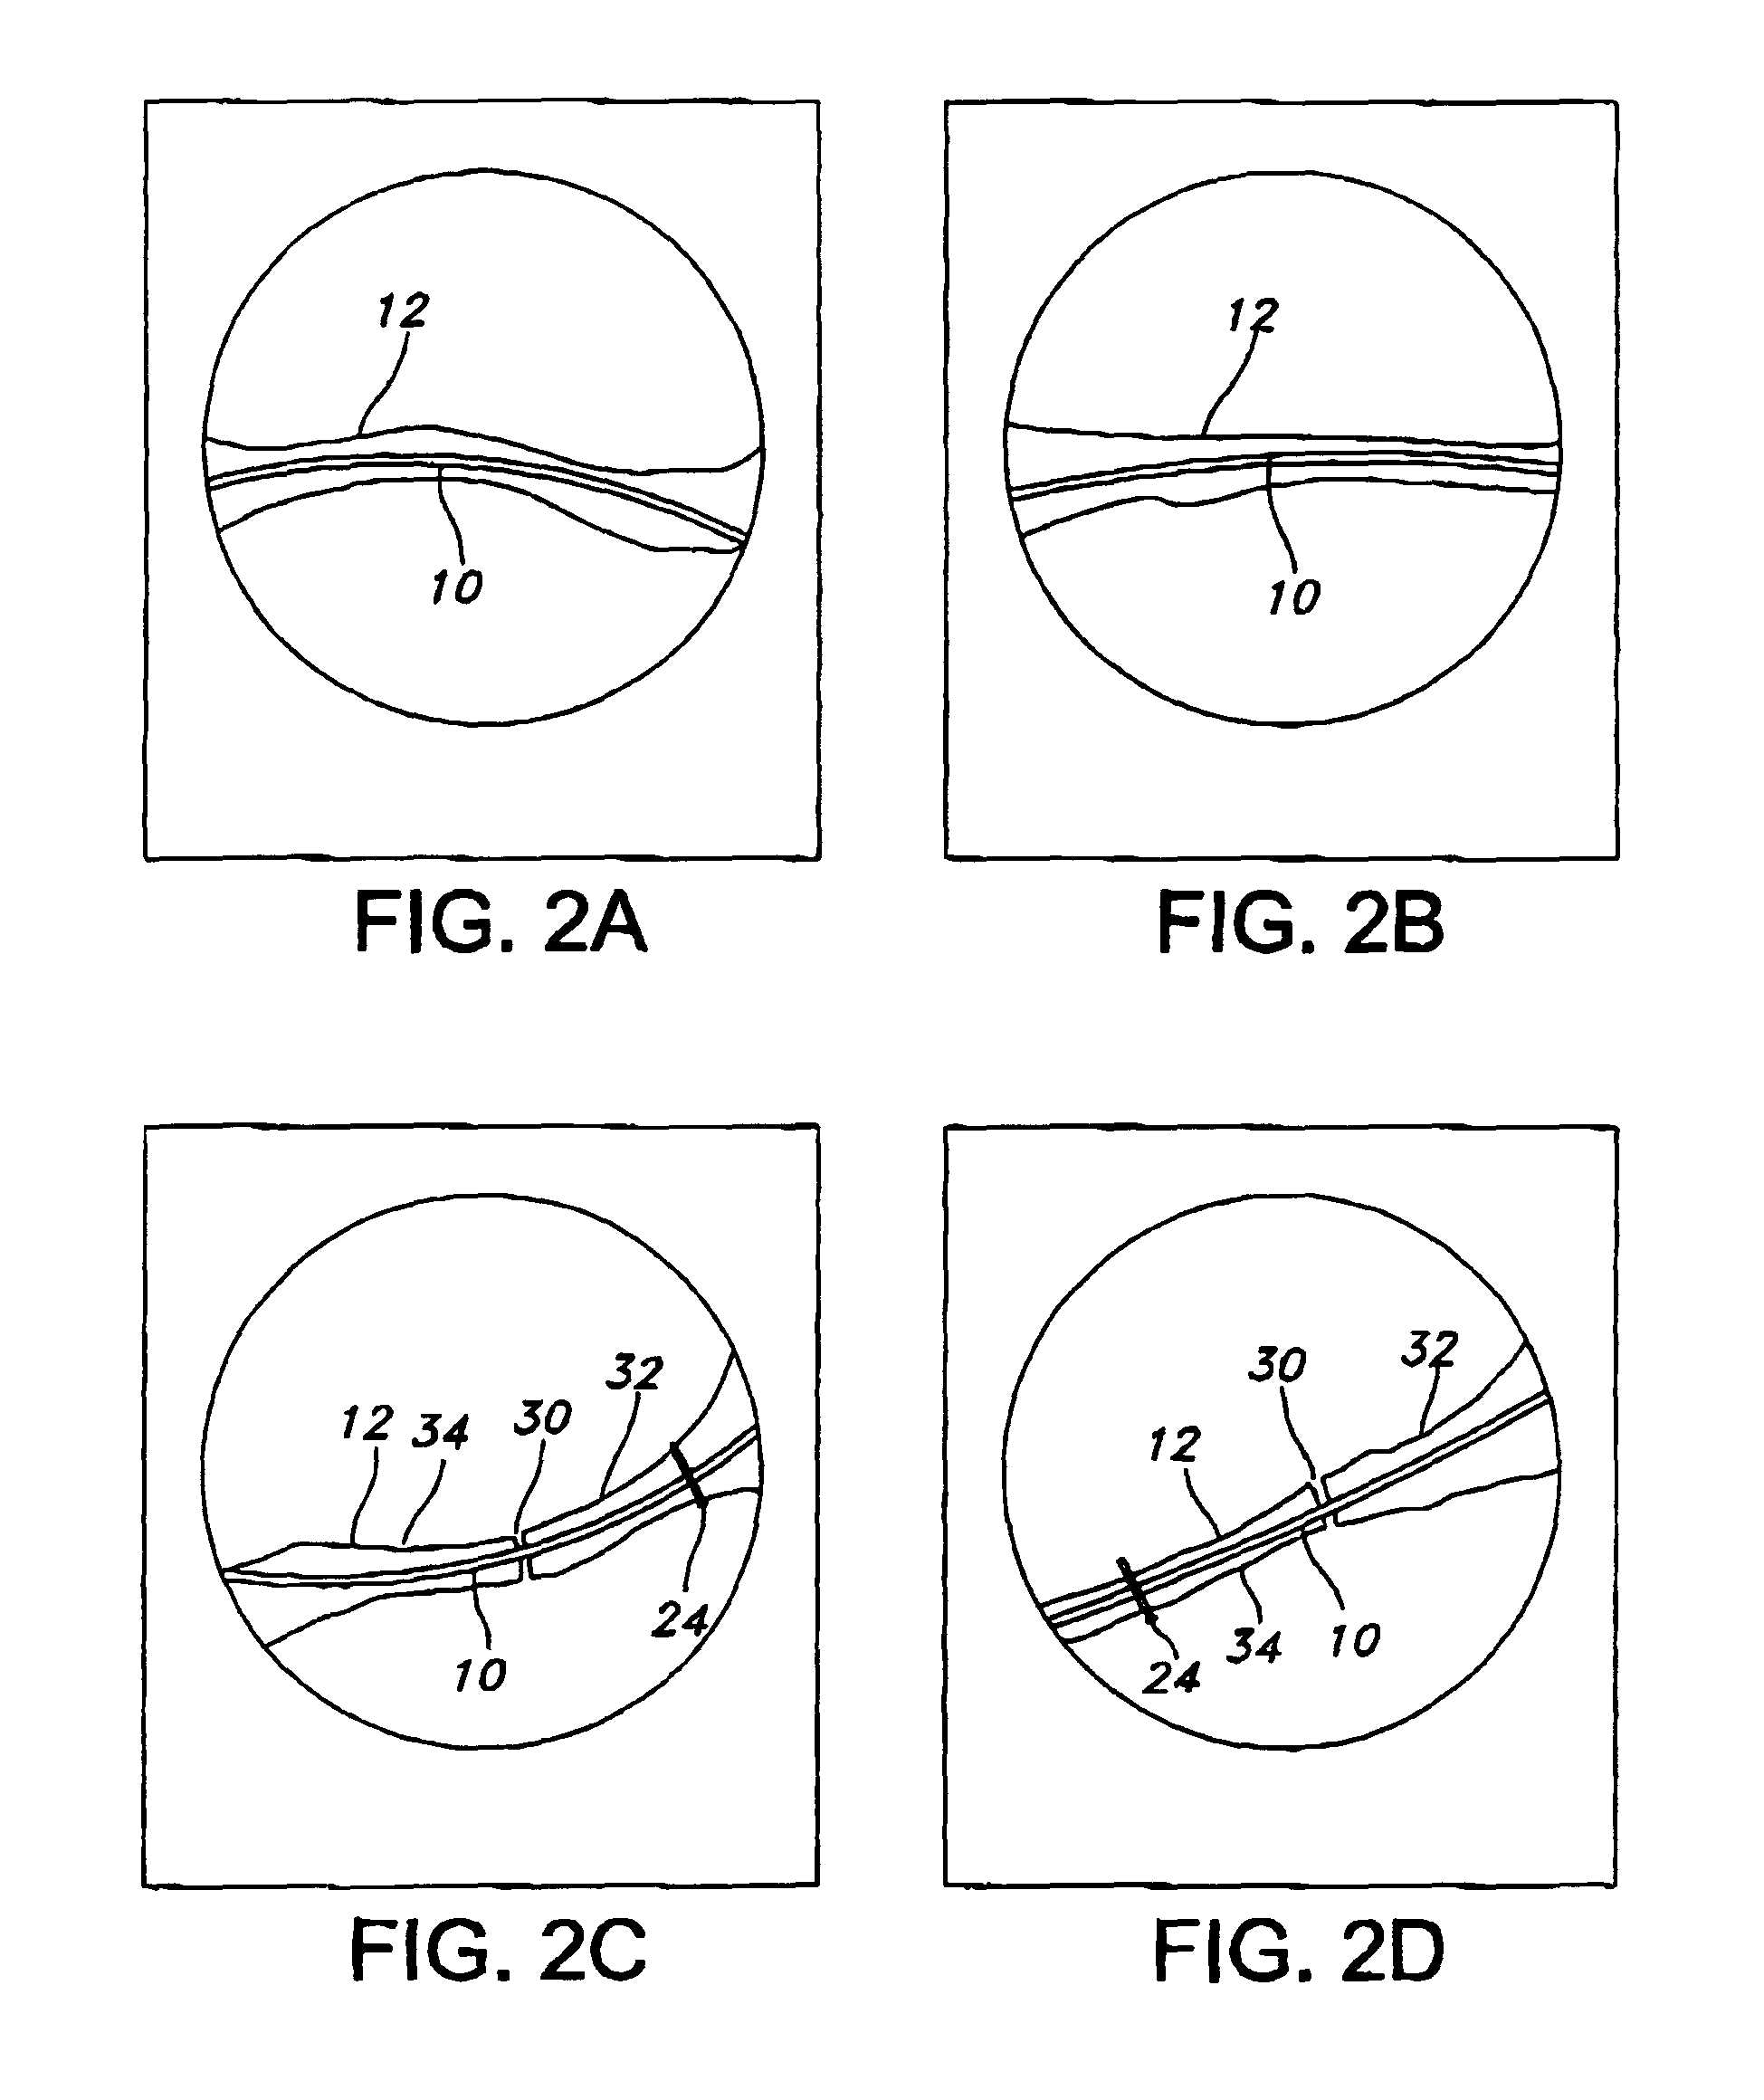 Pre-curved intramedullary clavicle nail and method of using same